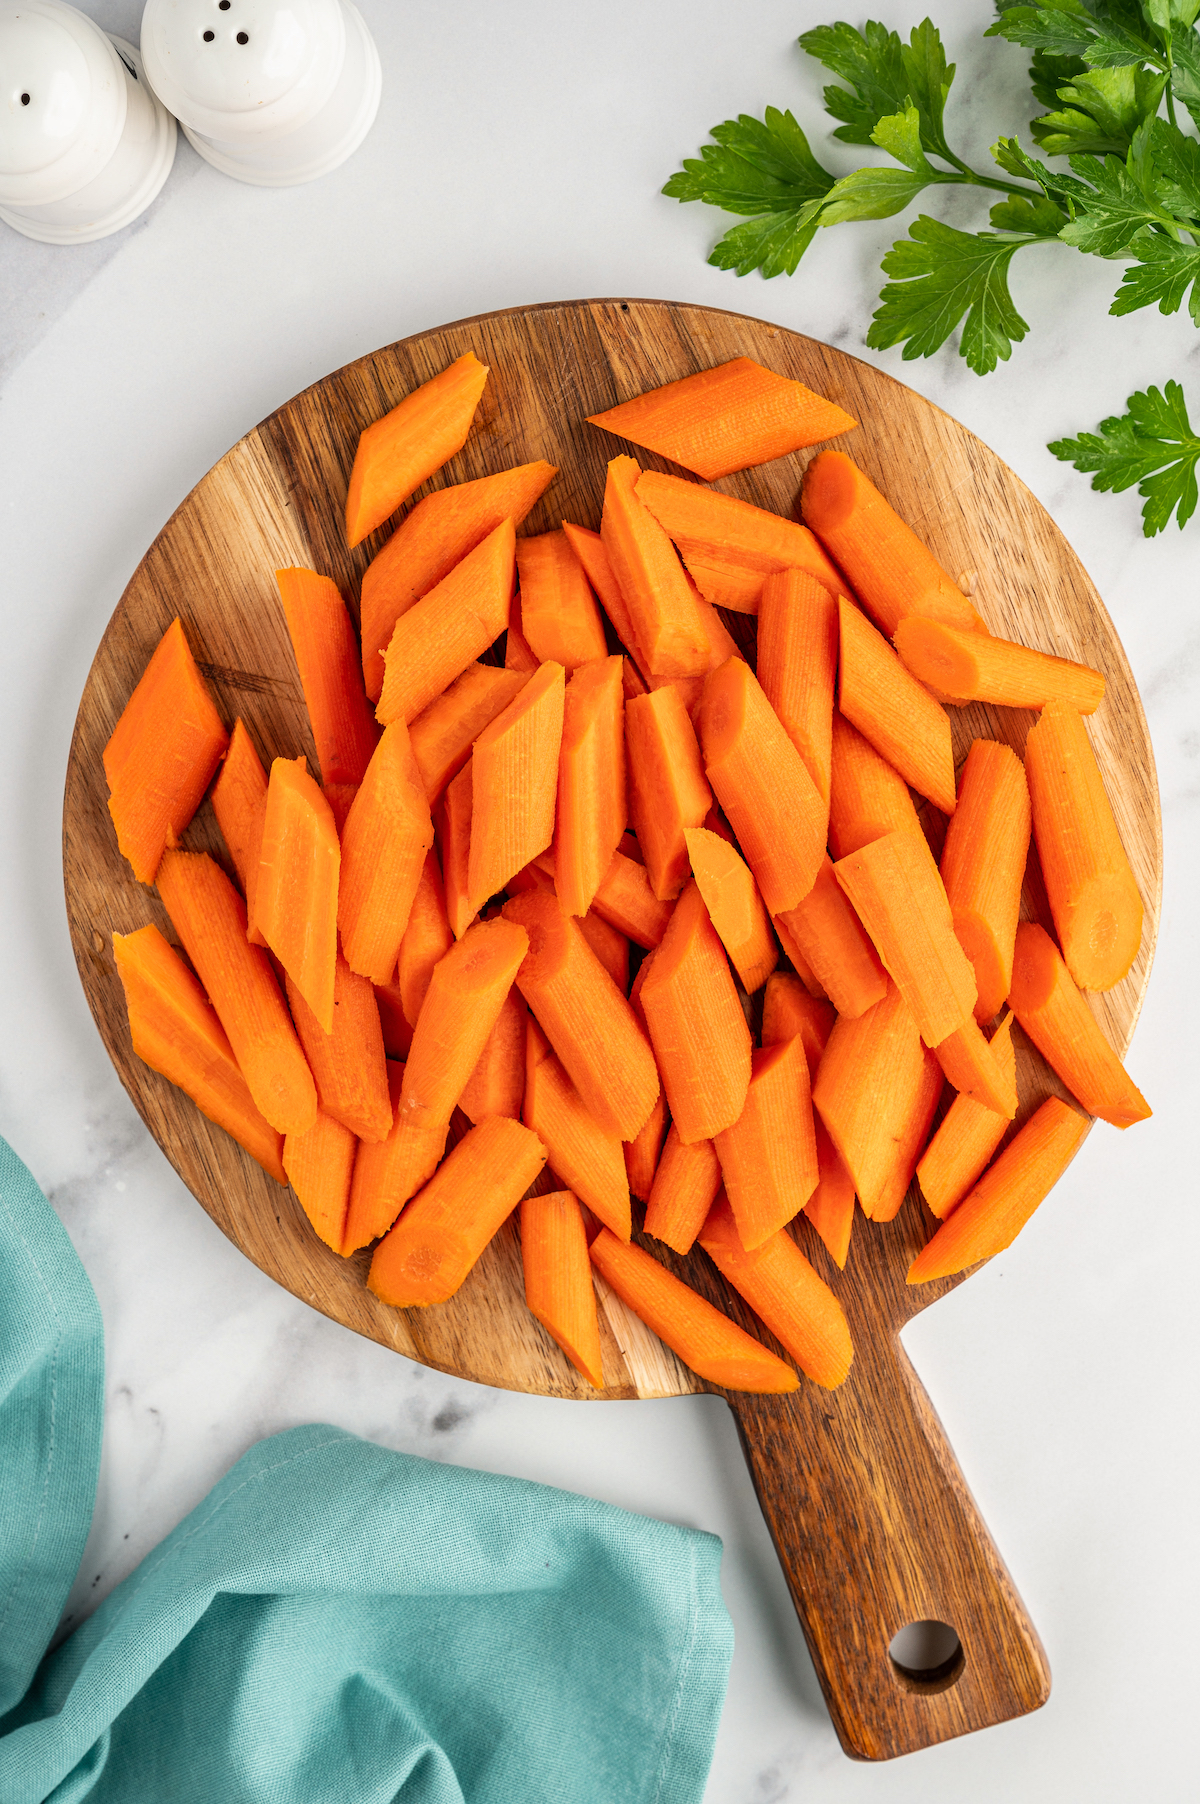 Peeled and cut carrots on a cutting board.